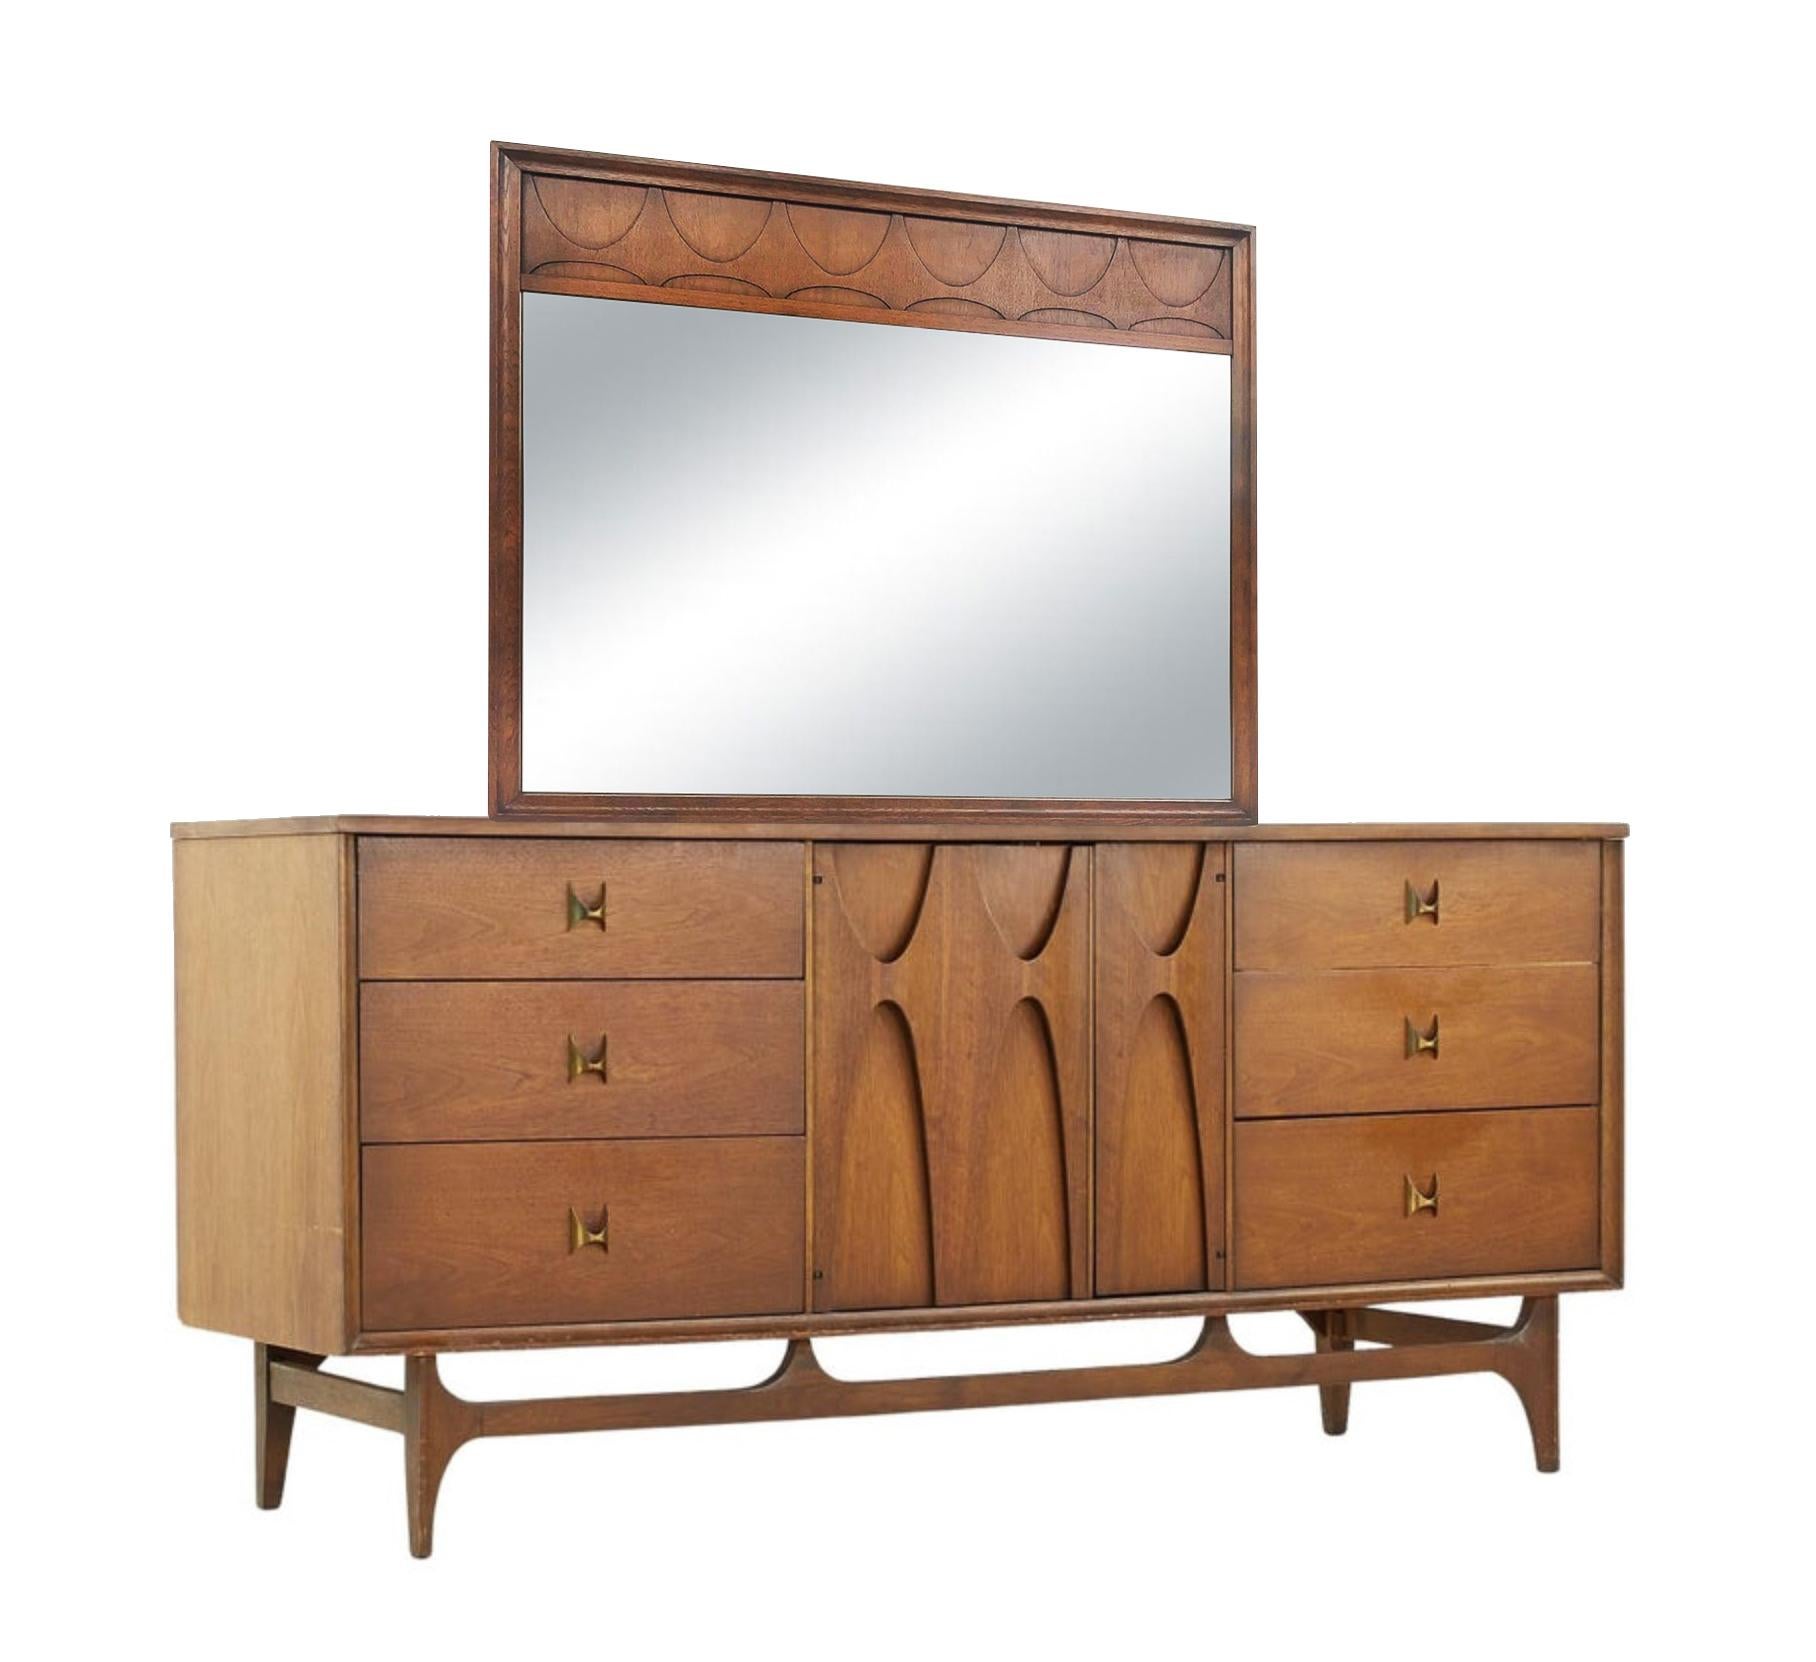 This fantastic long dresser & mirror combo was built in the 1970s by high-end manufacturer Broyhill for their Brasilia line of furntiure. Since then, the Brasilia line has become more desirable, and original sets are difficult to come by. Featuring